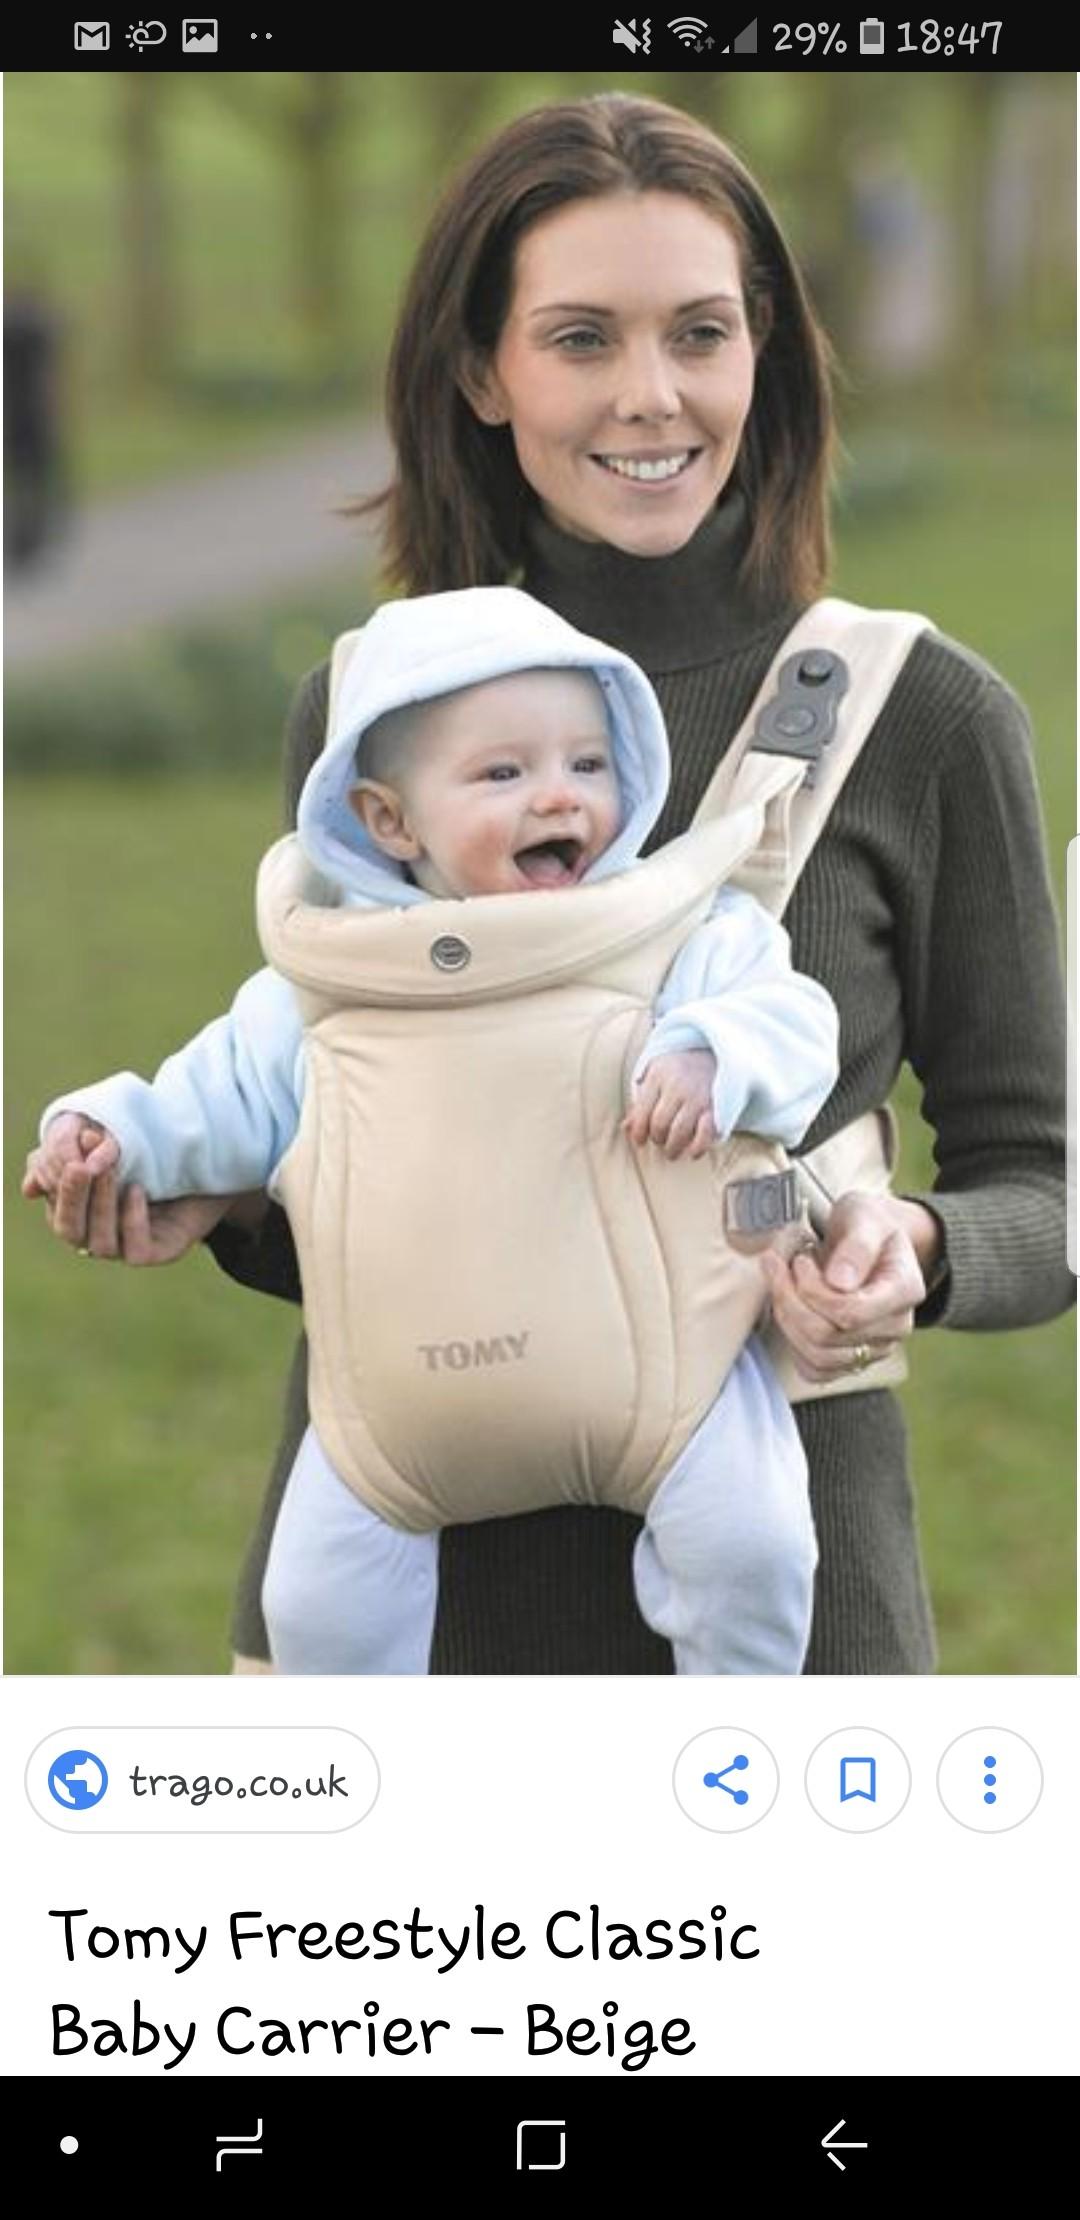 tomy freestyle classic baby carrier